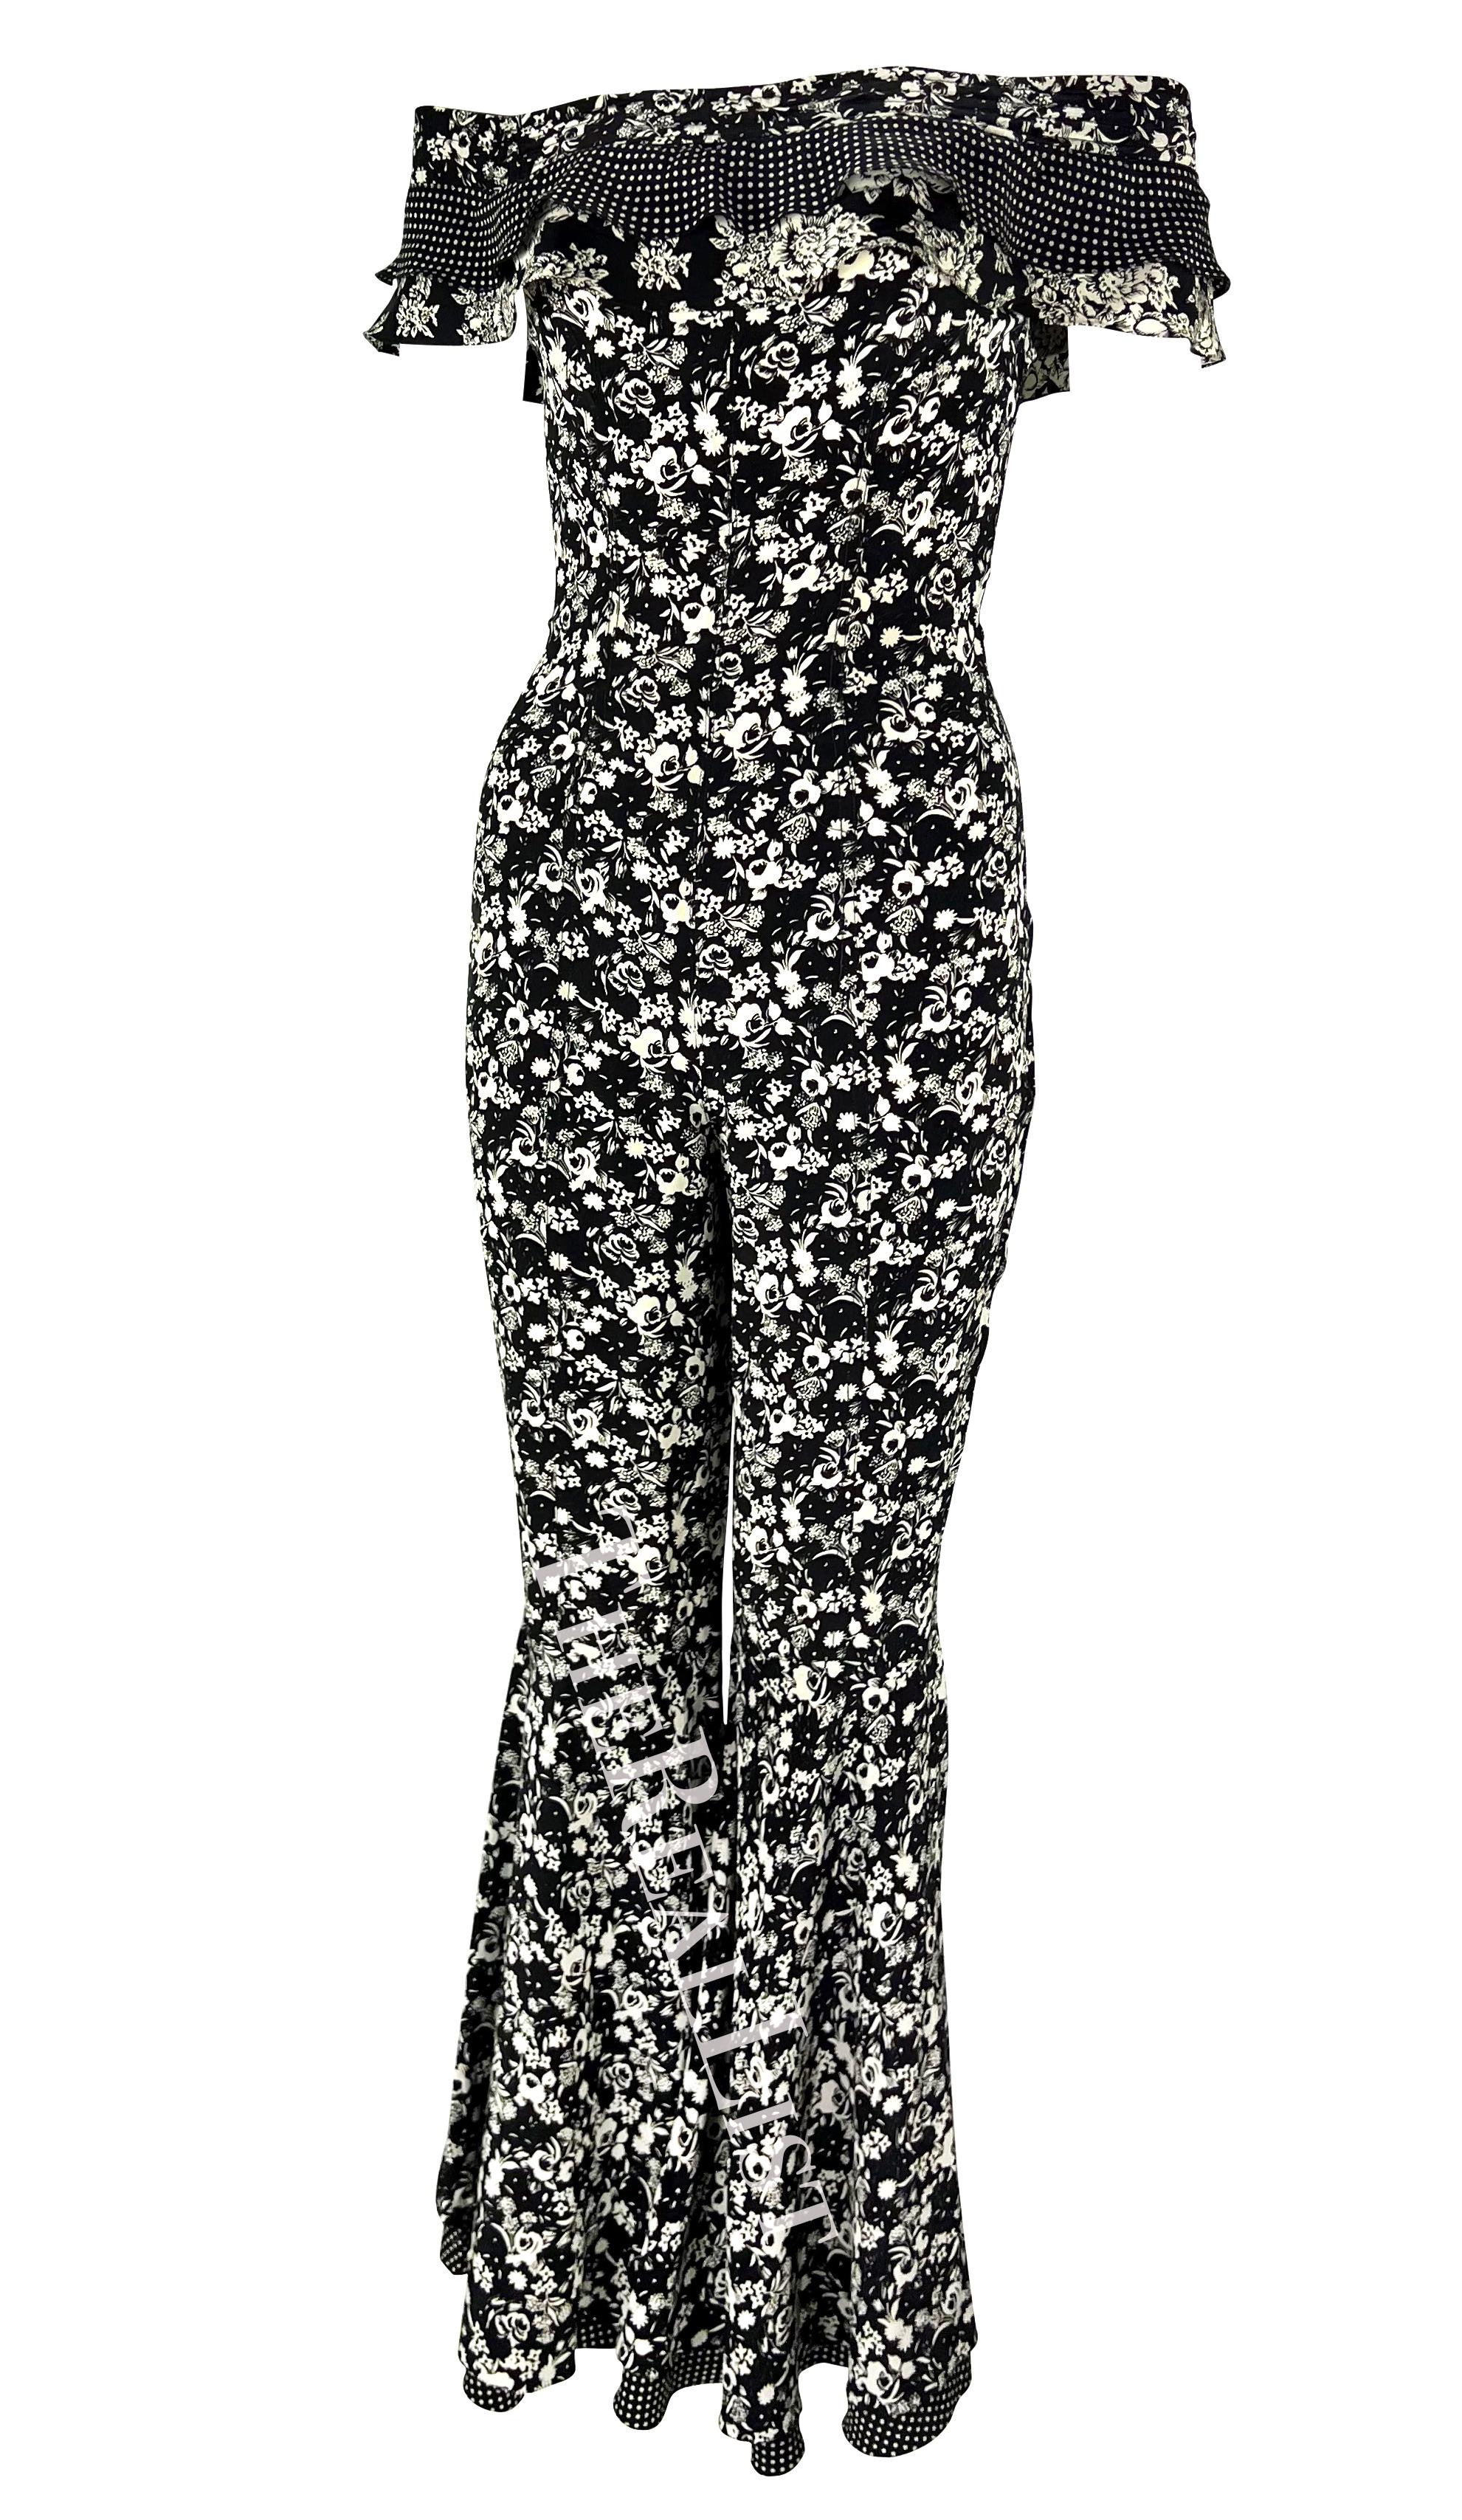 S/S 1993 Gianni Versace Black White Floral Flared Bell-Bottom Catsuit In Good Condition For Sale In West Hollywood, CA